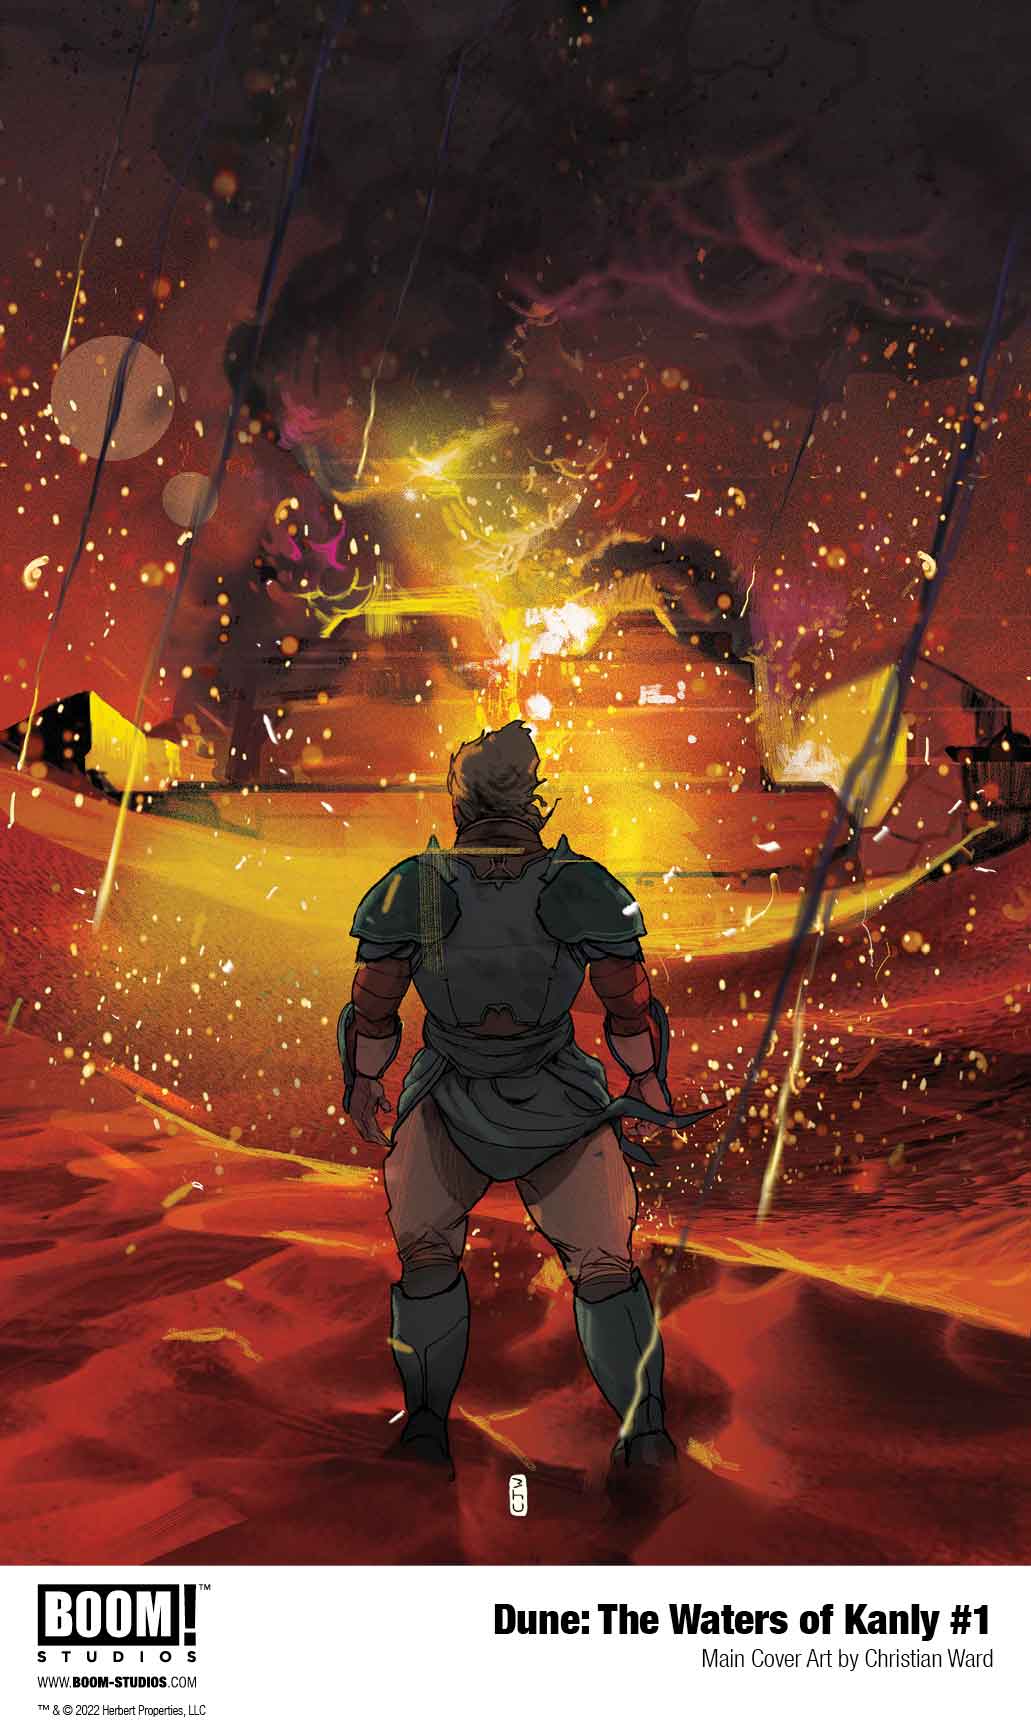 'Dune: The Waters of Kanly' #1 comic book: Main cover art by Christian Ward.